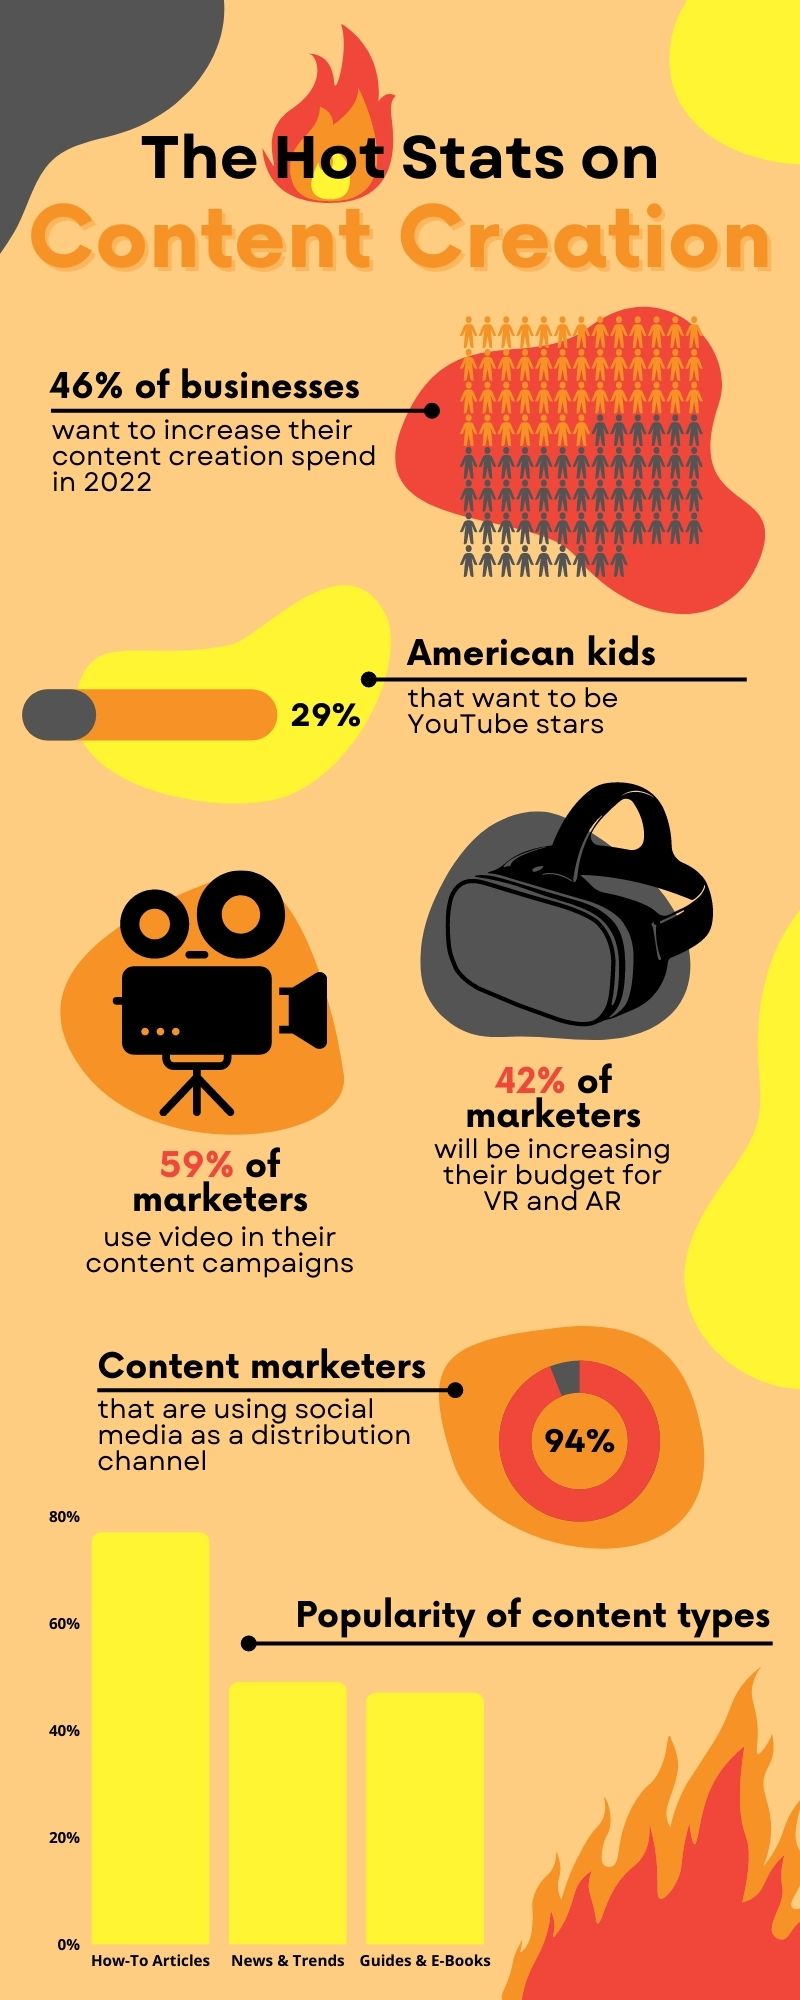 The Hot Stats on Content Creation